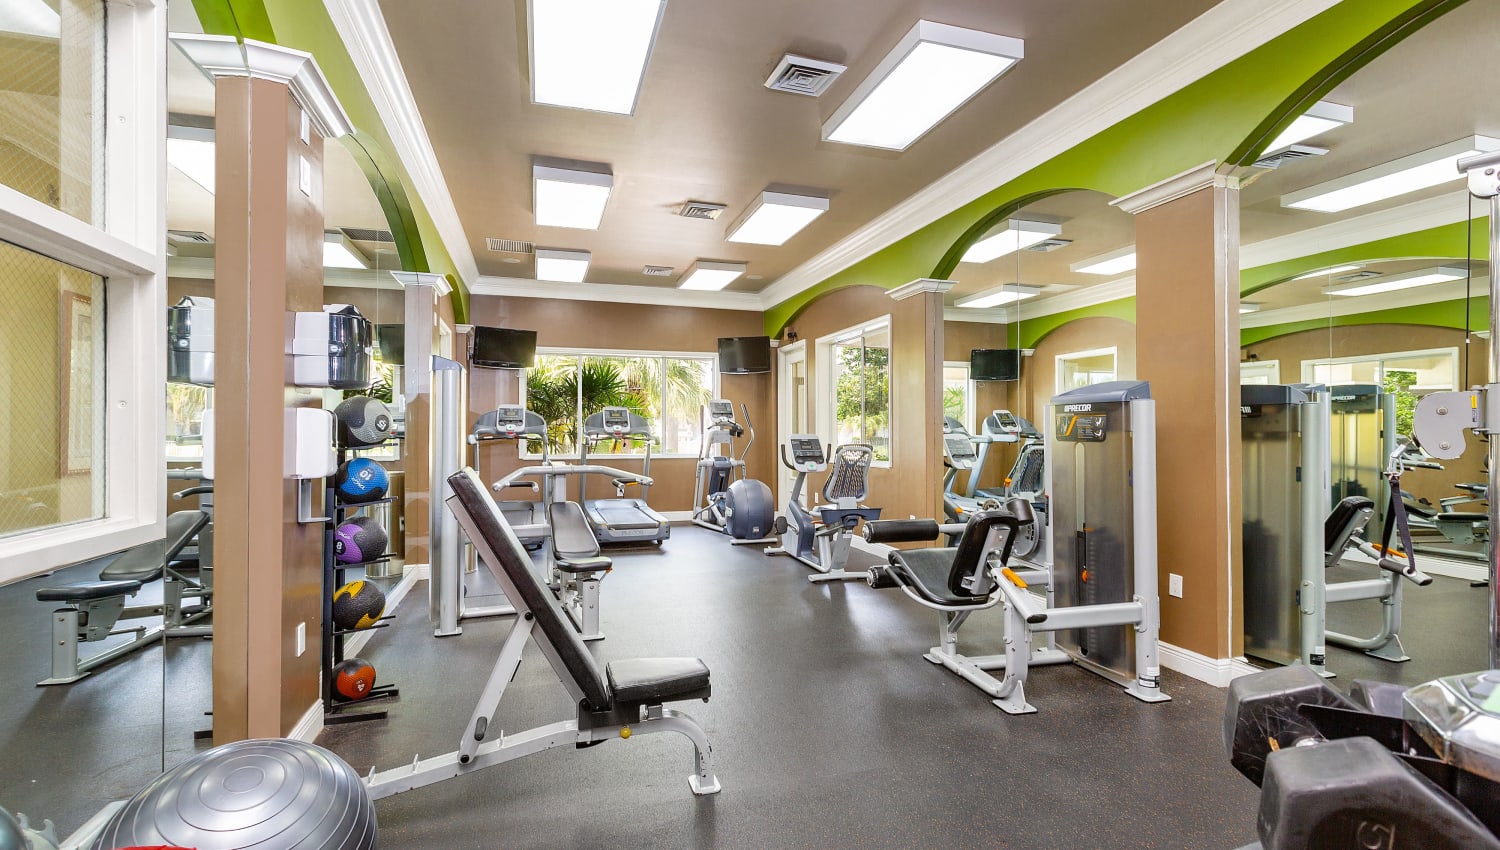 Fitness center at Ibis Reserve Apartments in West Palm Beach, Florida